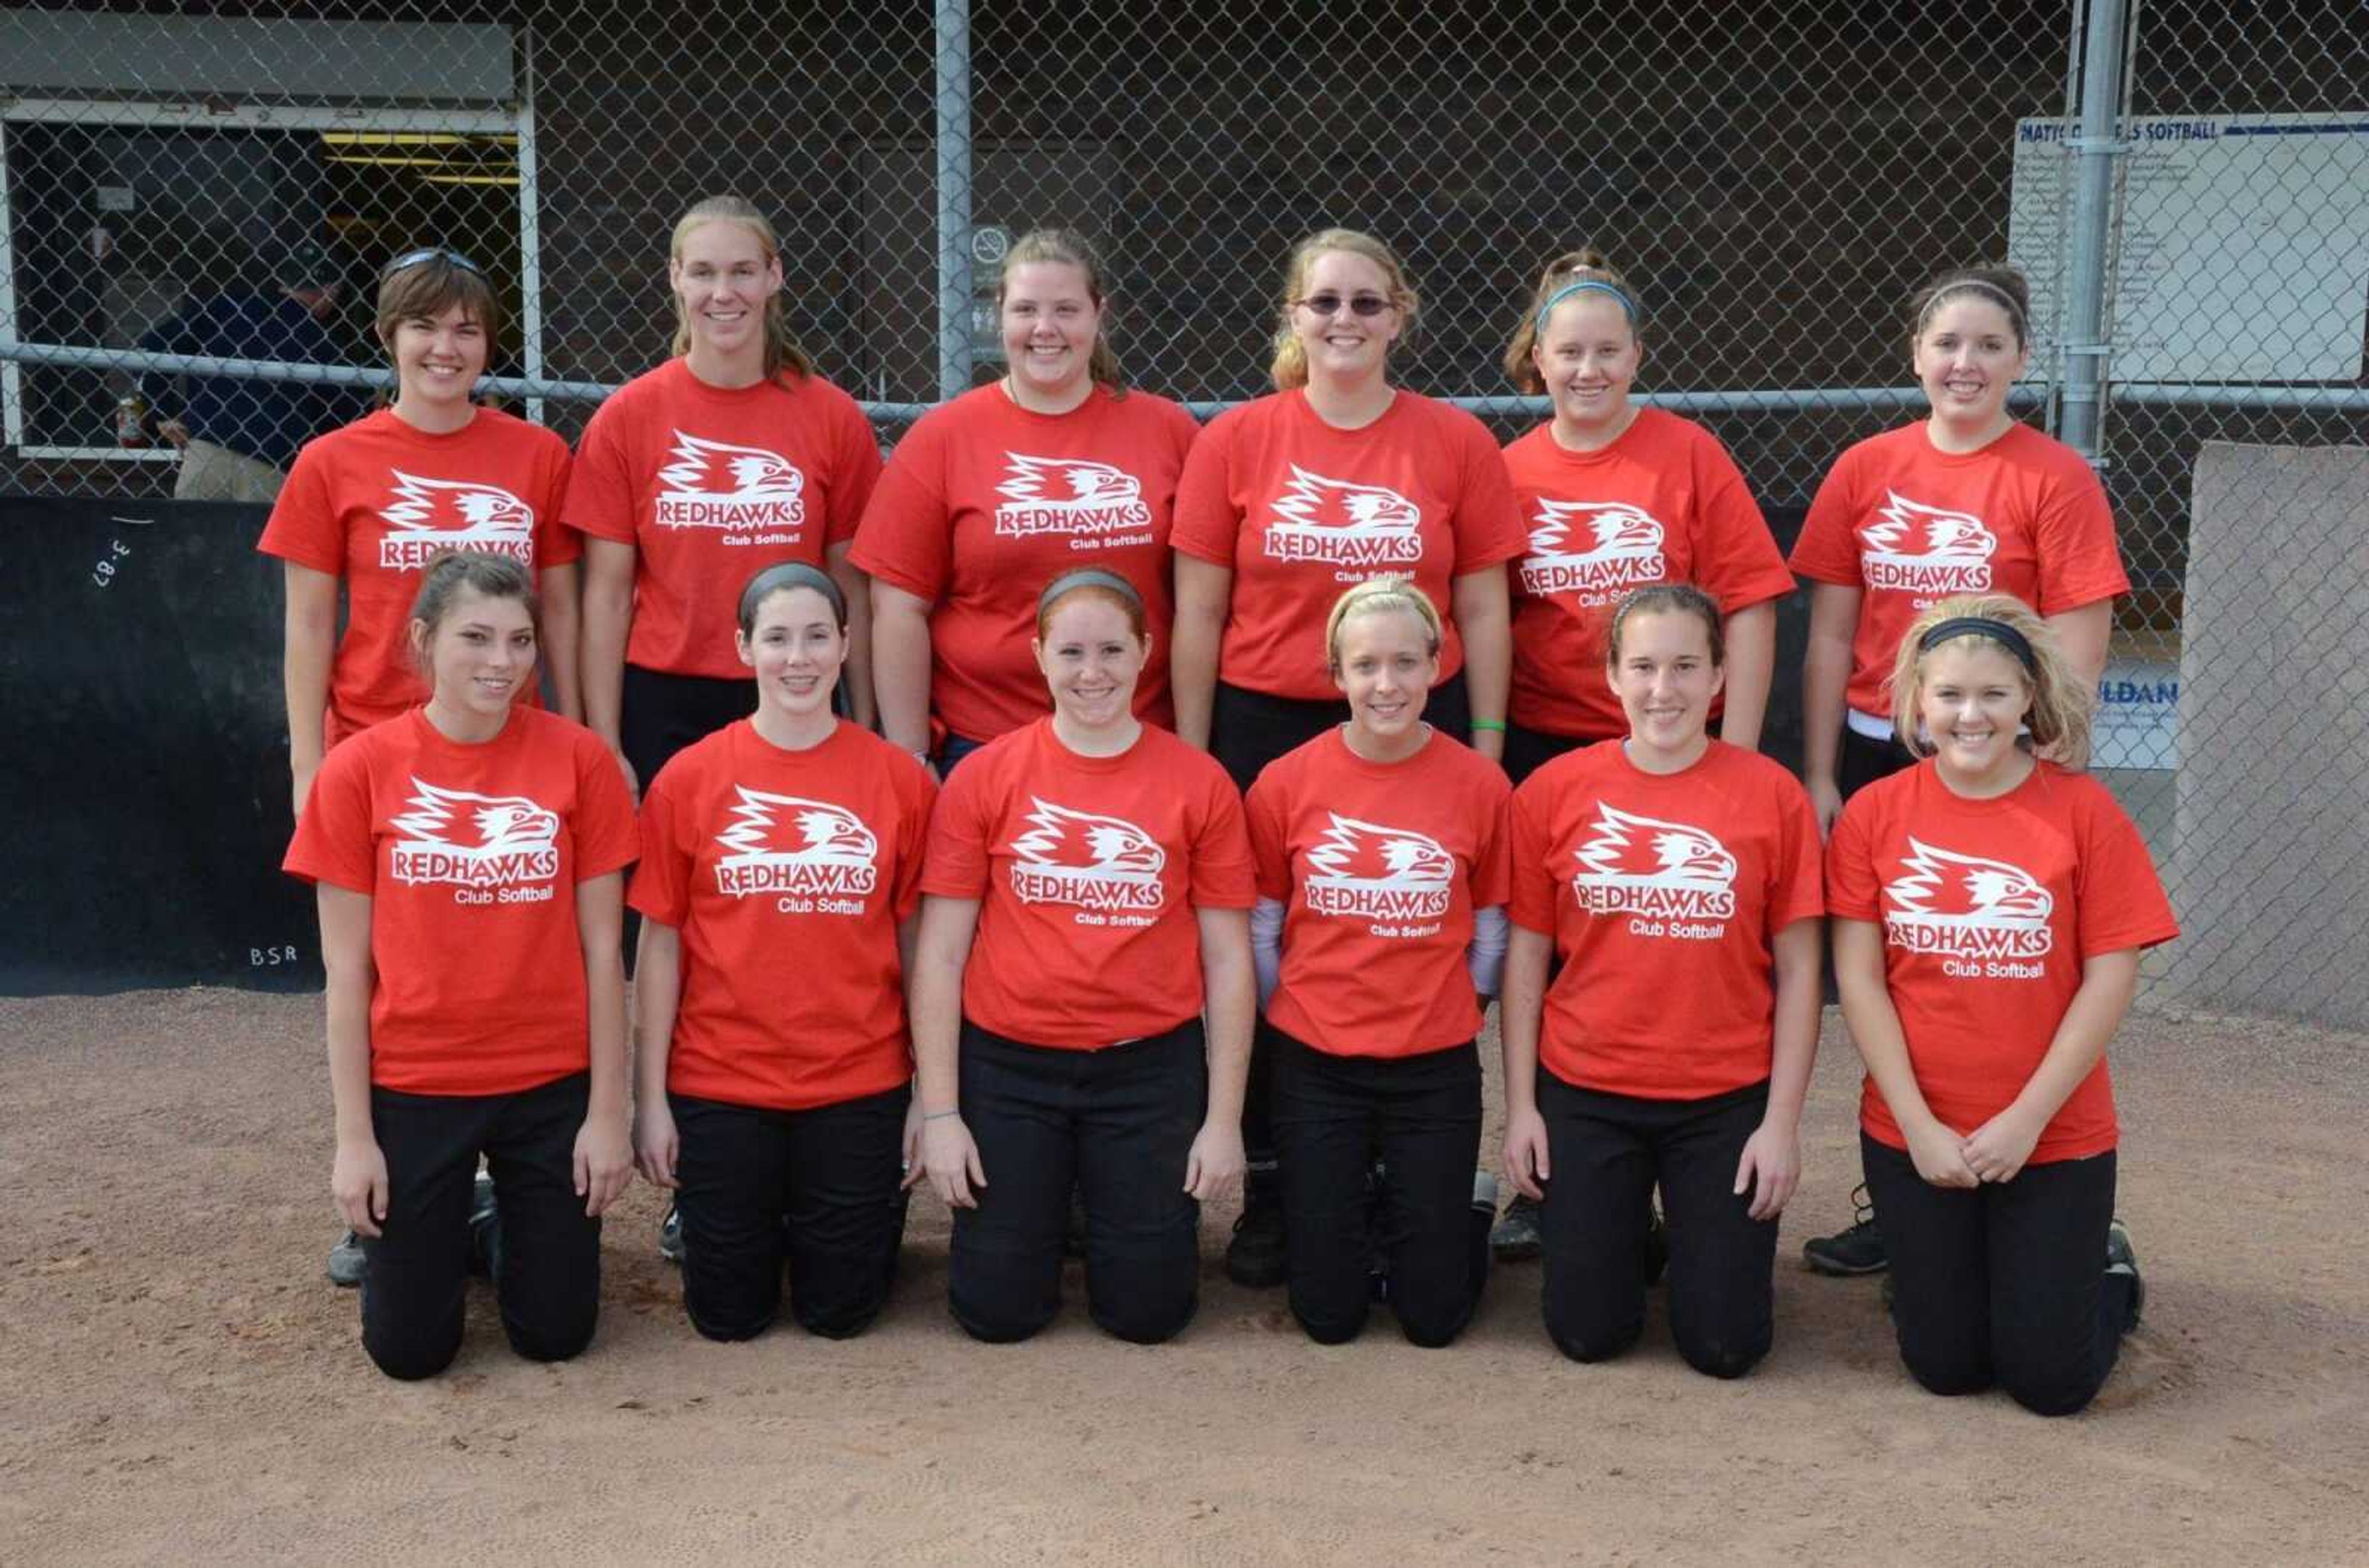 Club softball prepares for the 2012 season with five new players